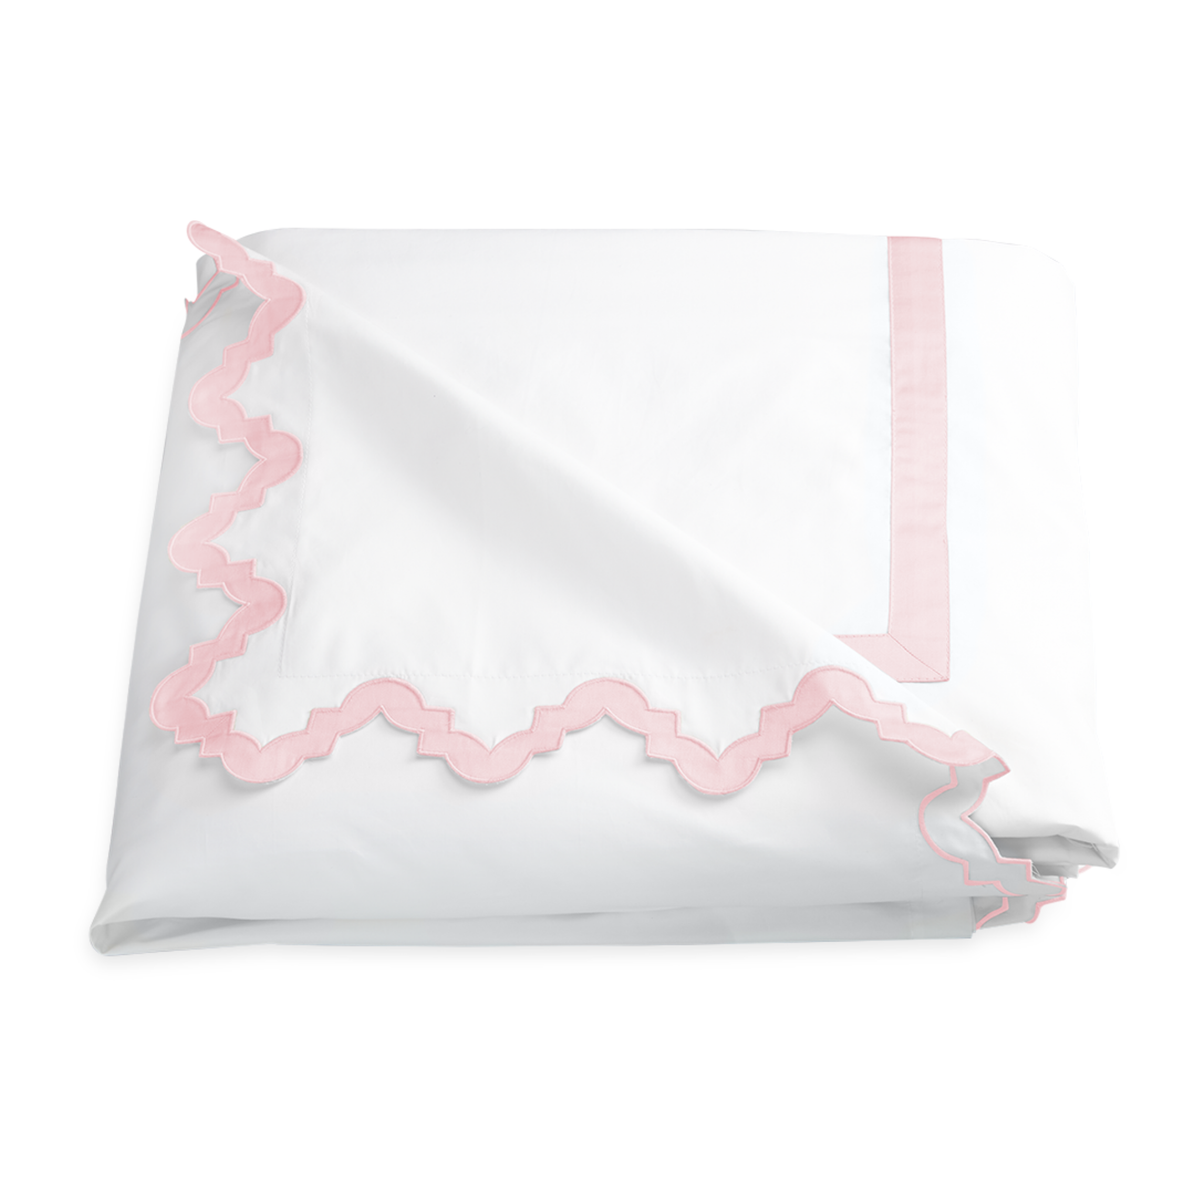 Folded Duvet Cover of Matouk Aziza Bedding in Pink Color